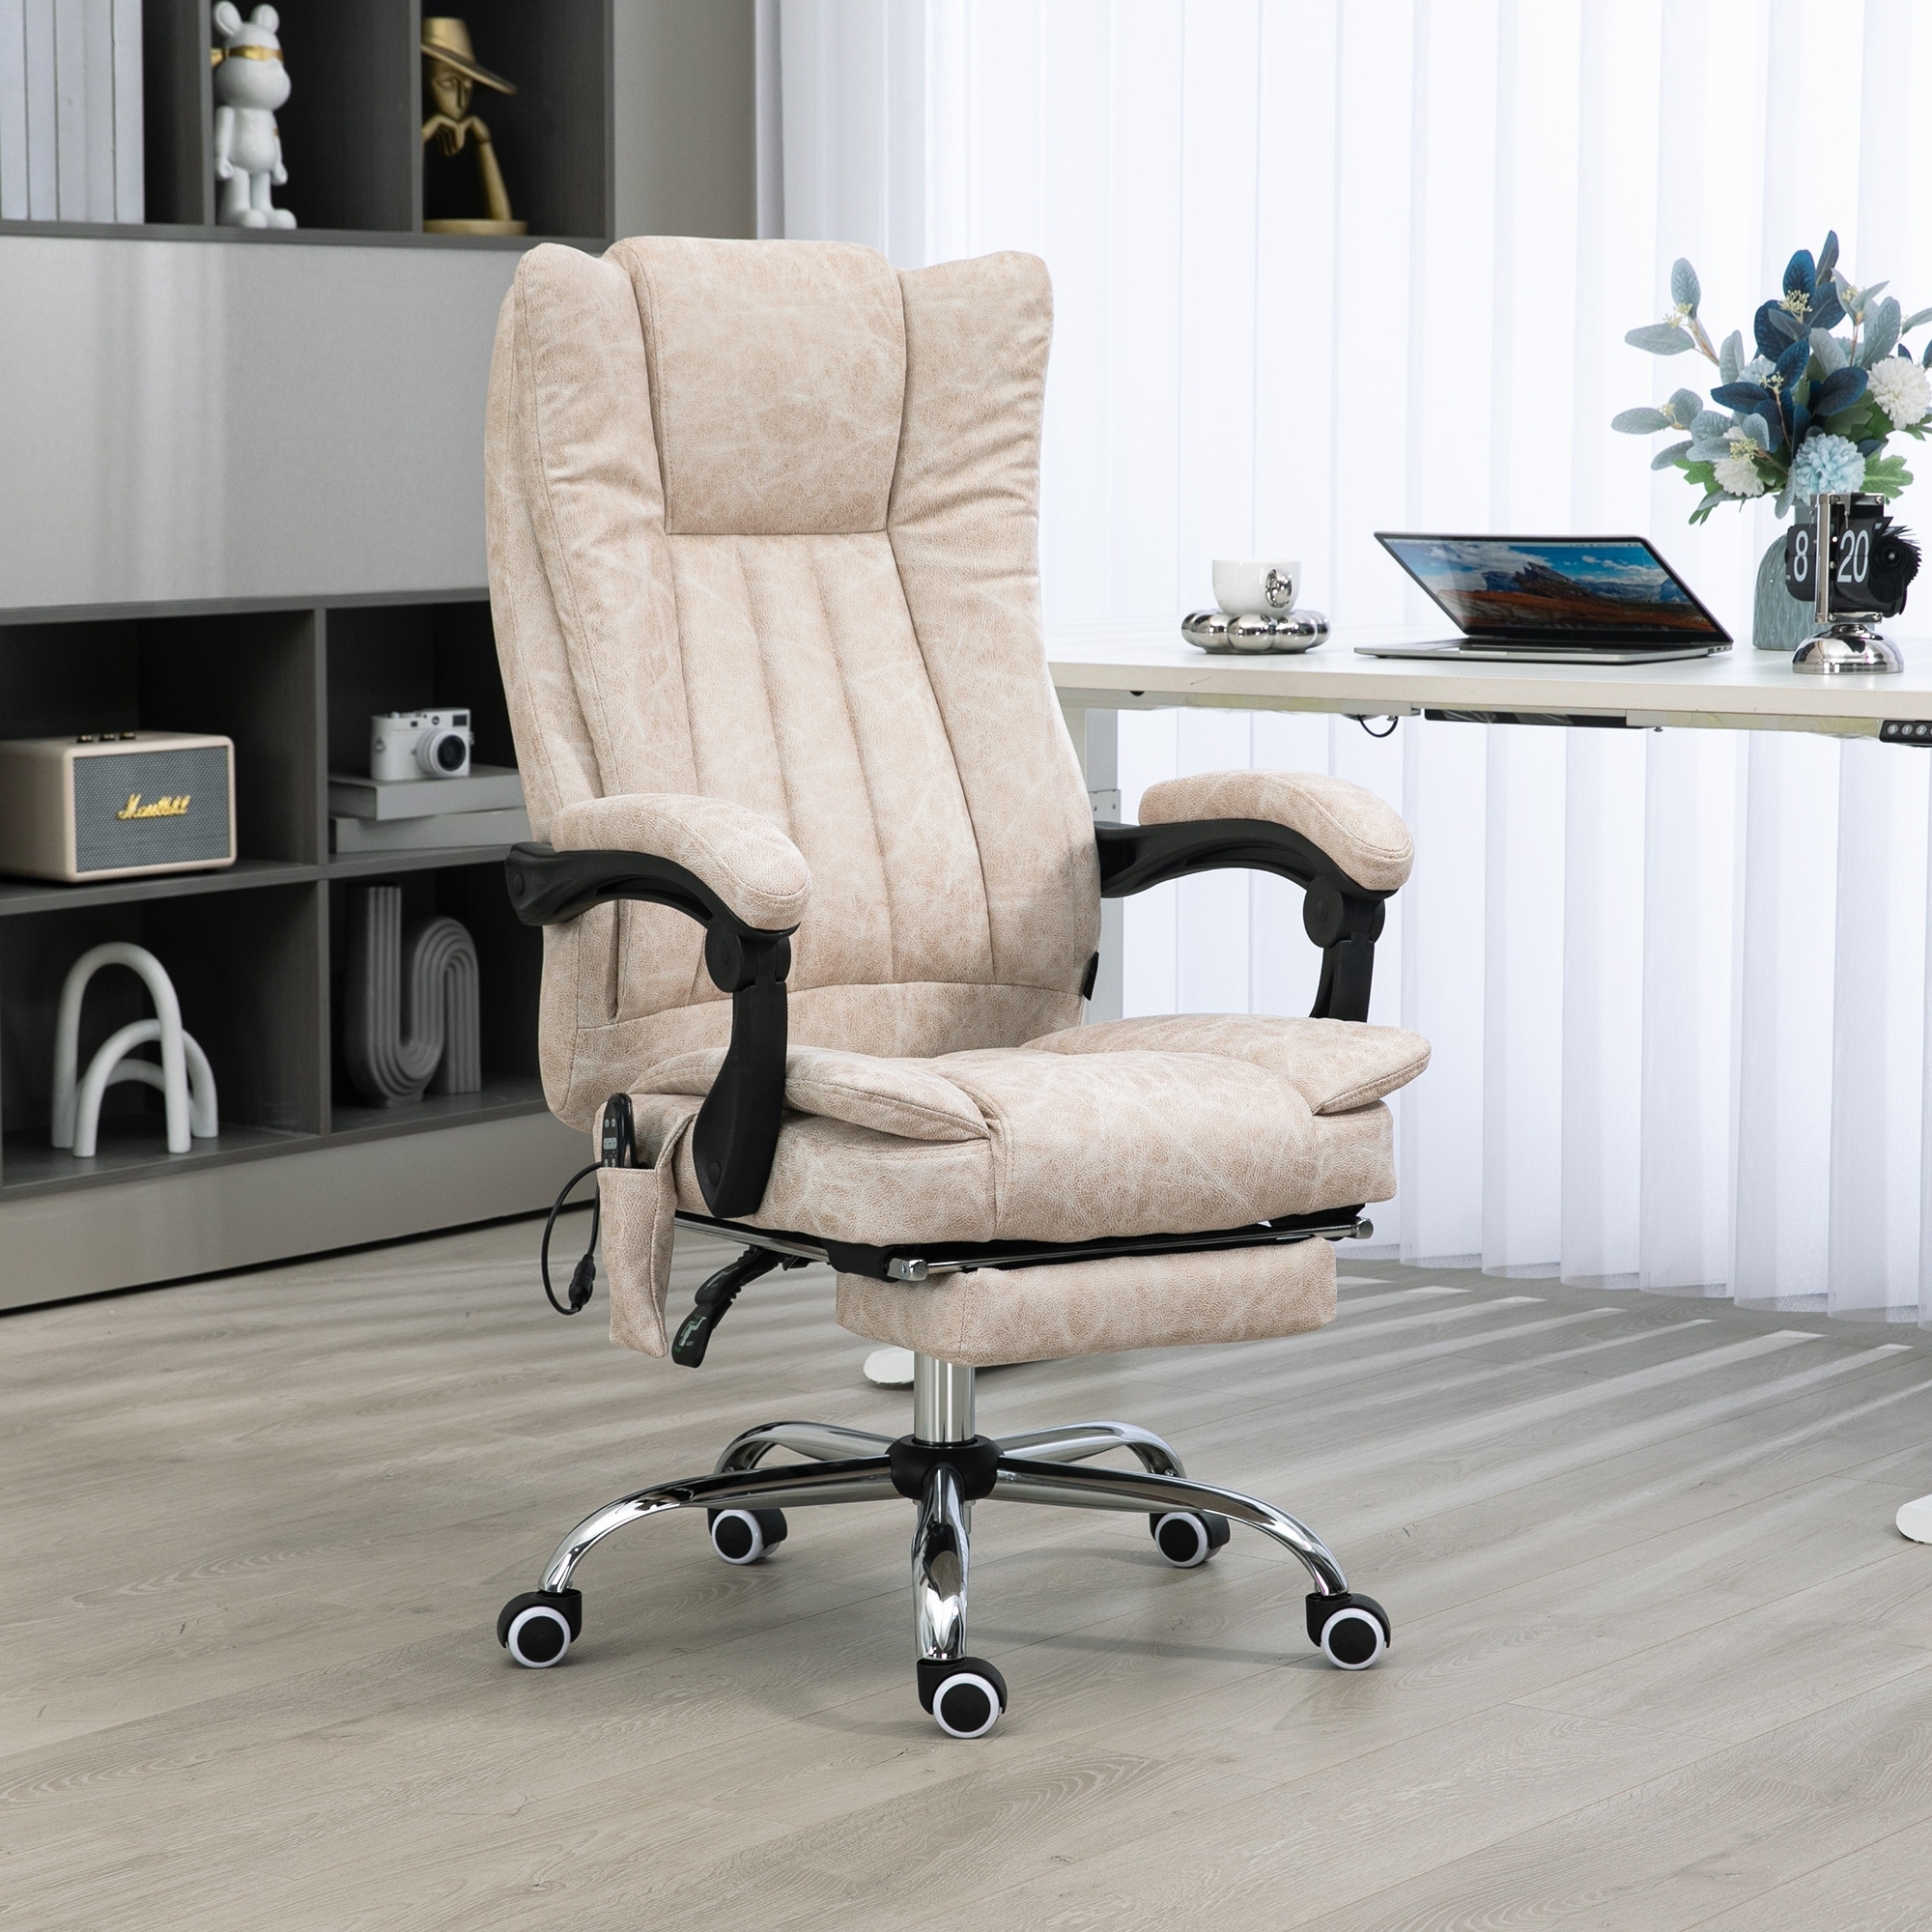 High Back Massage Office Desk Chair with 6-Point Vibrating Pillow